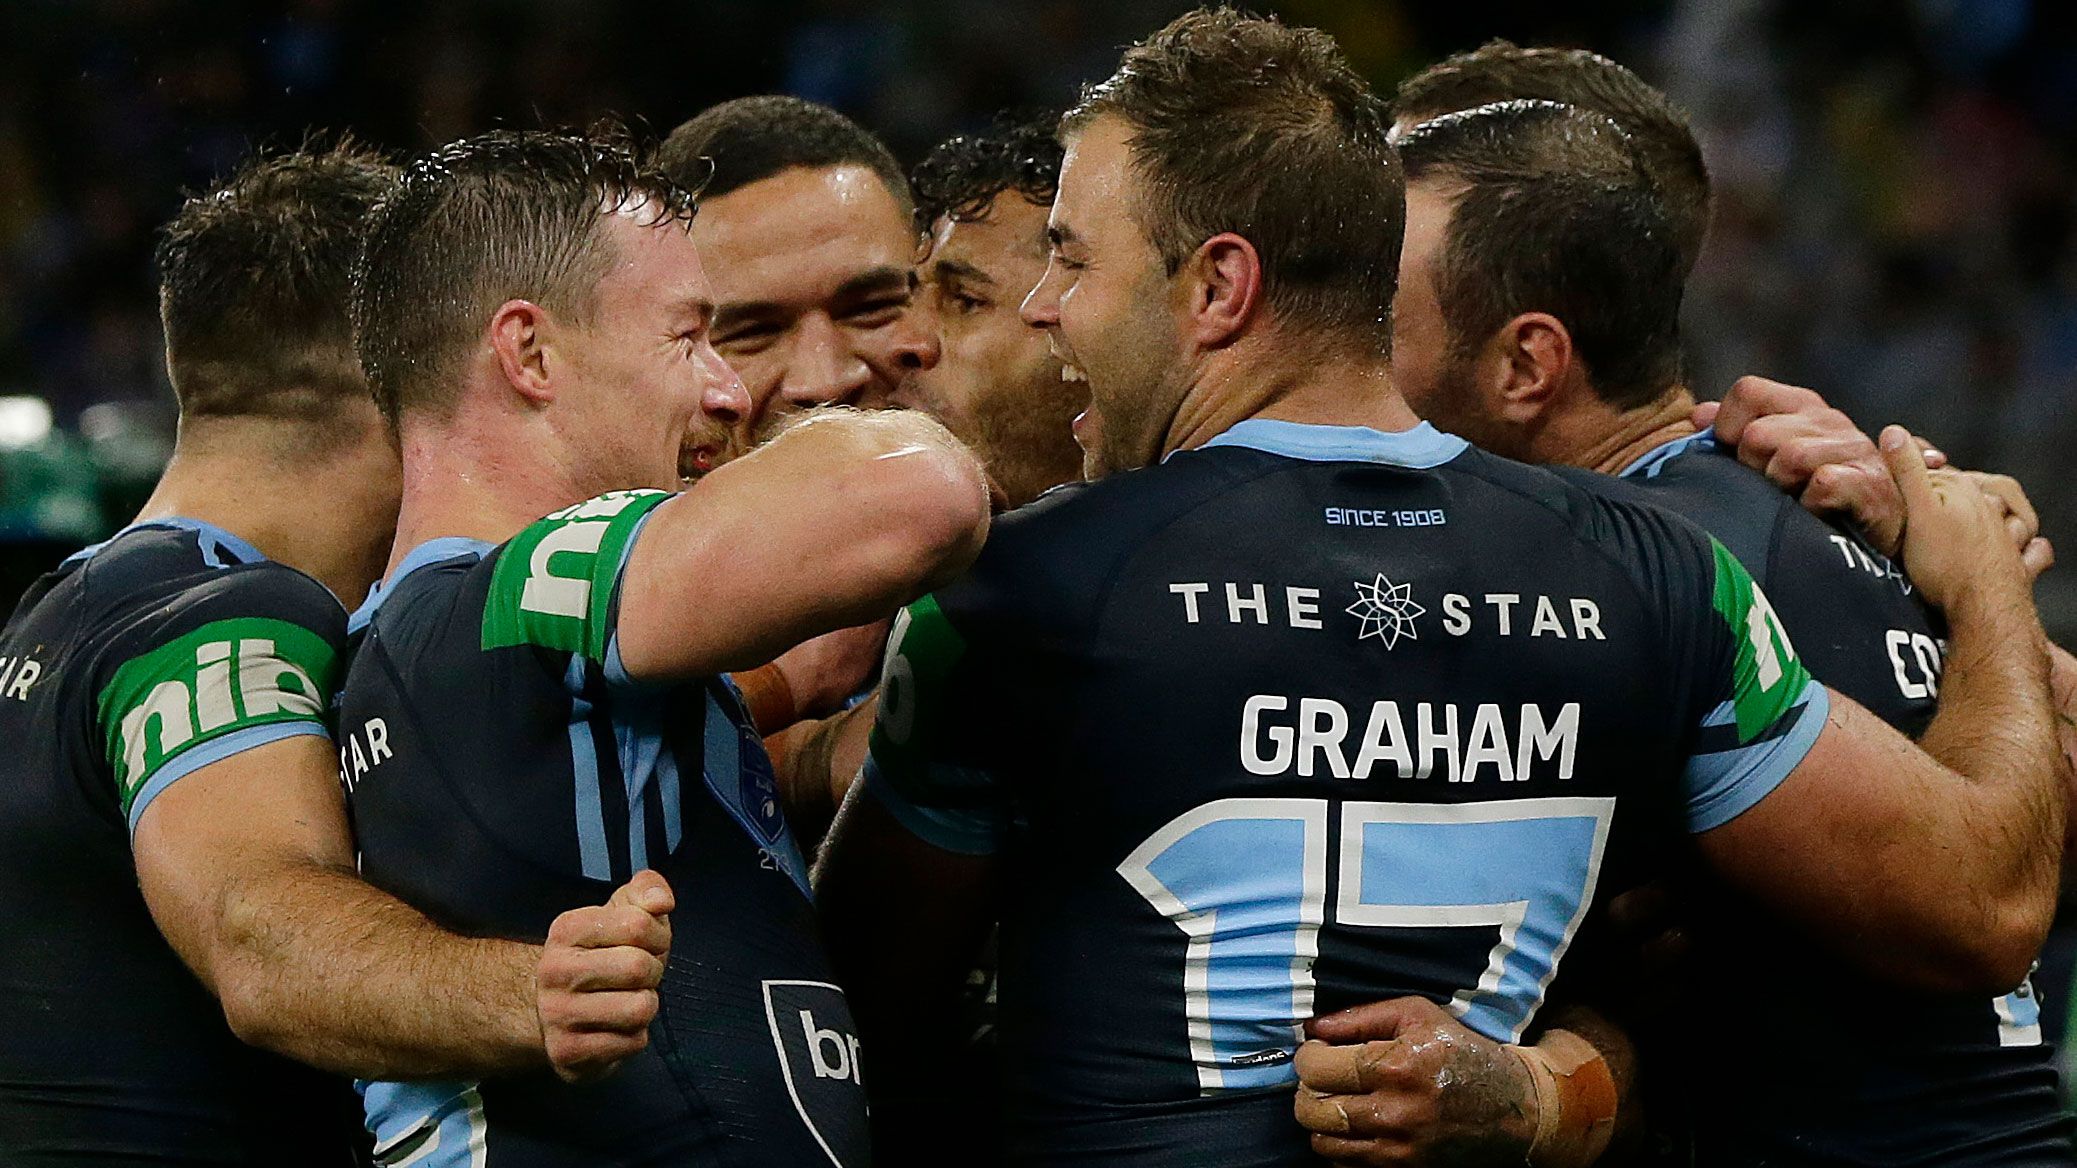 Wade Graham and the NSW team celebrates.